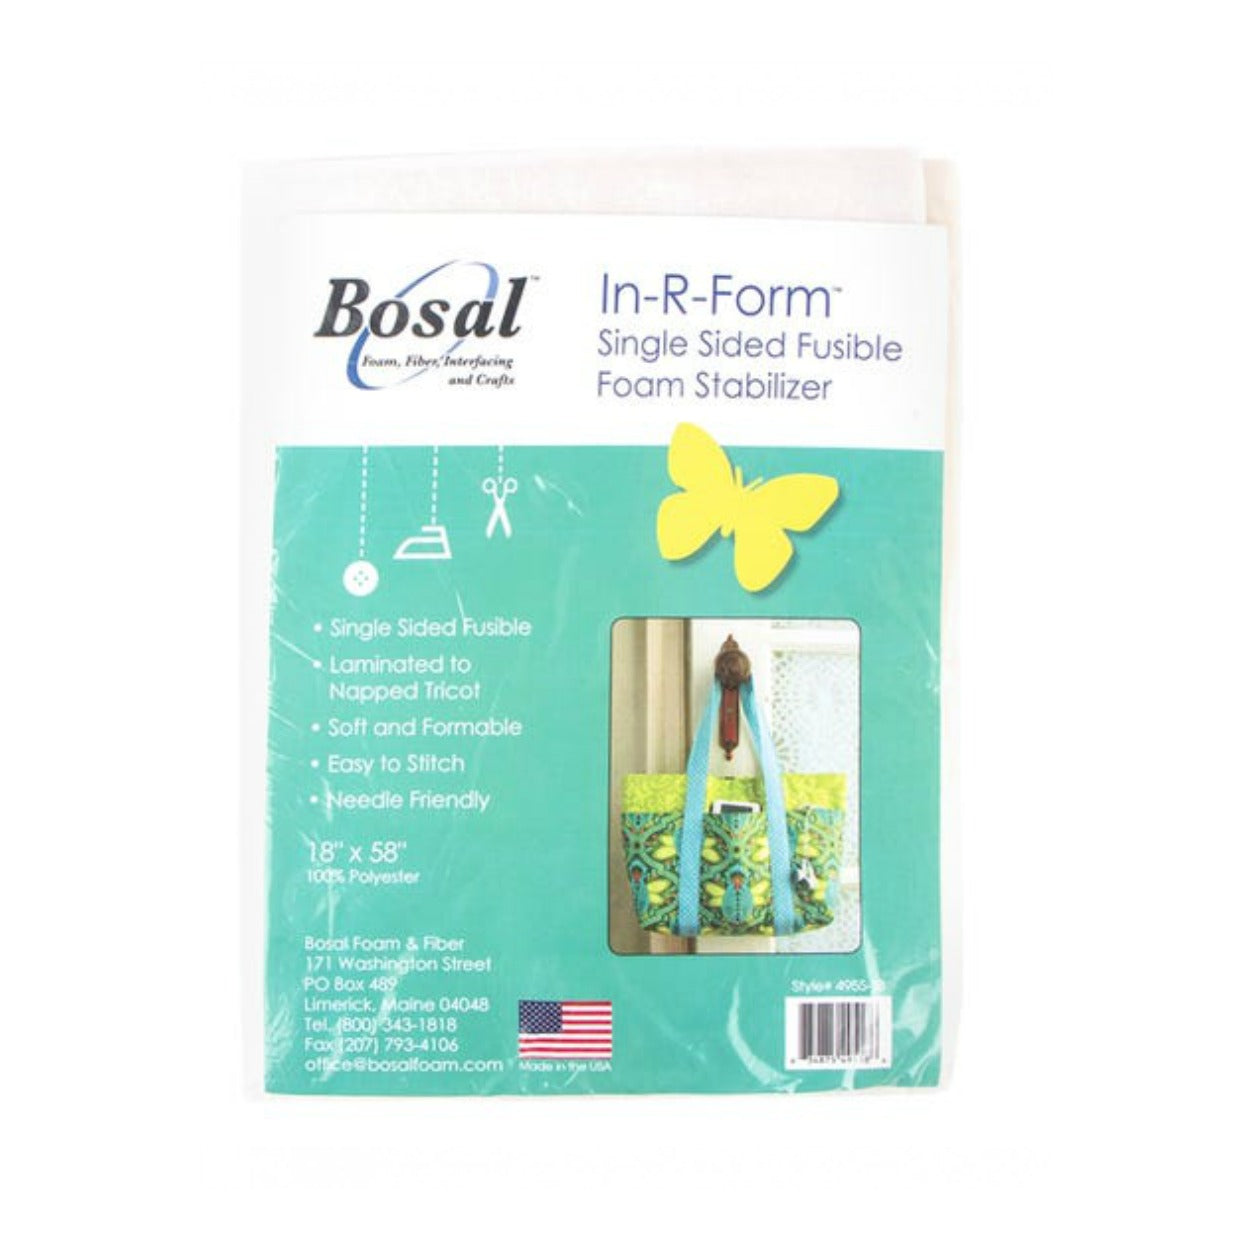 Bosal In-R-Form Single-Sided Fusible 18" by 58" White